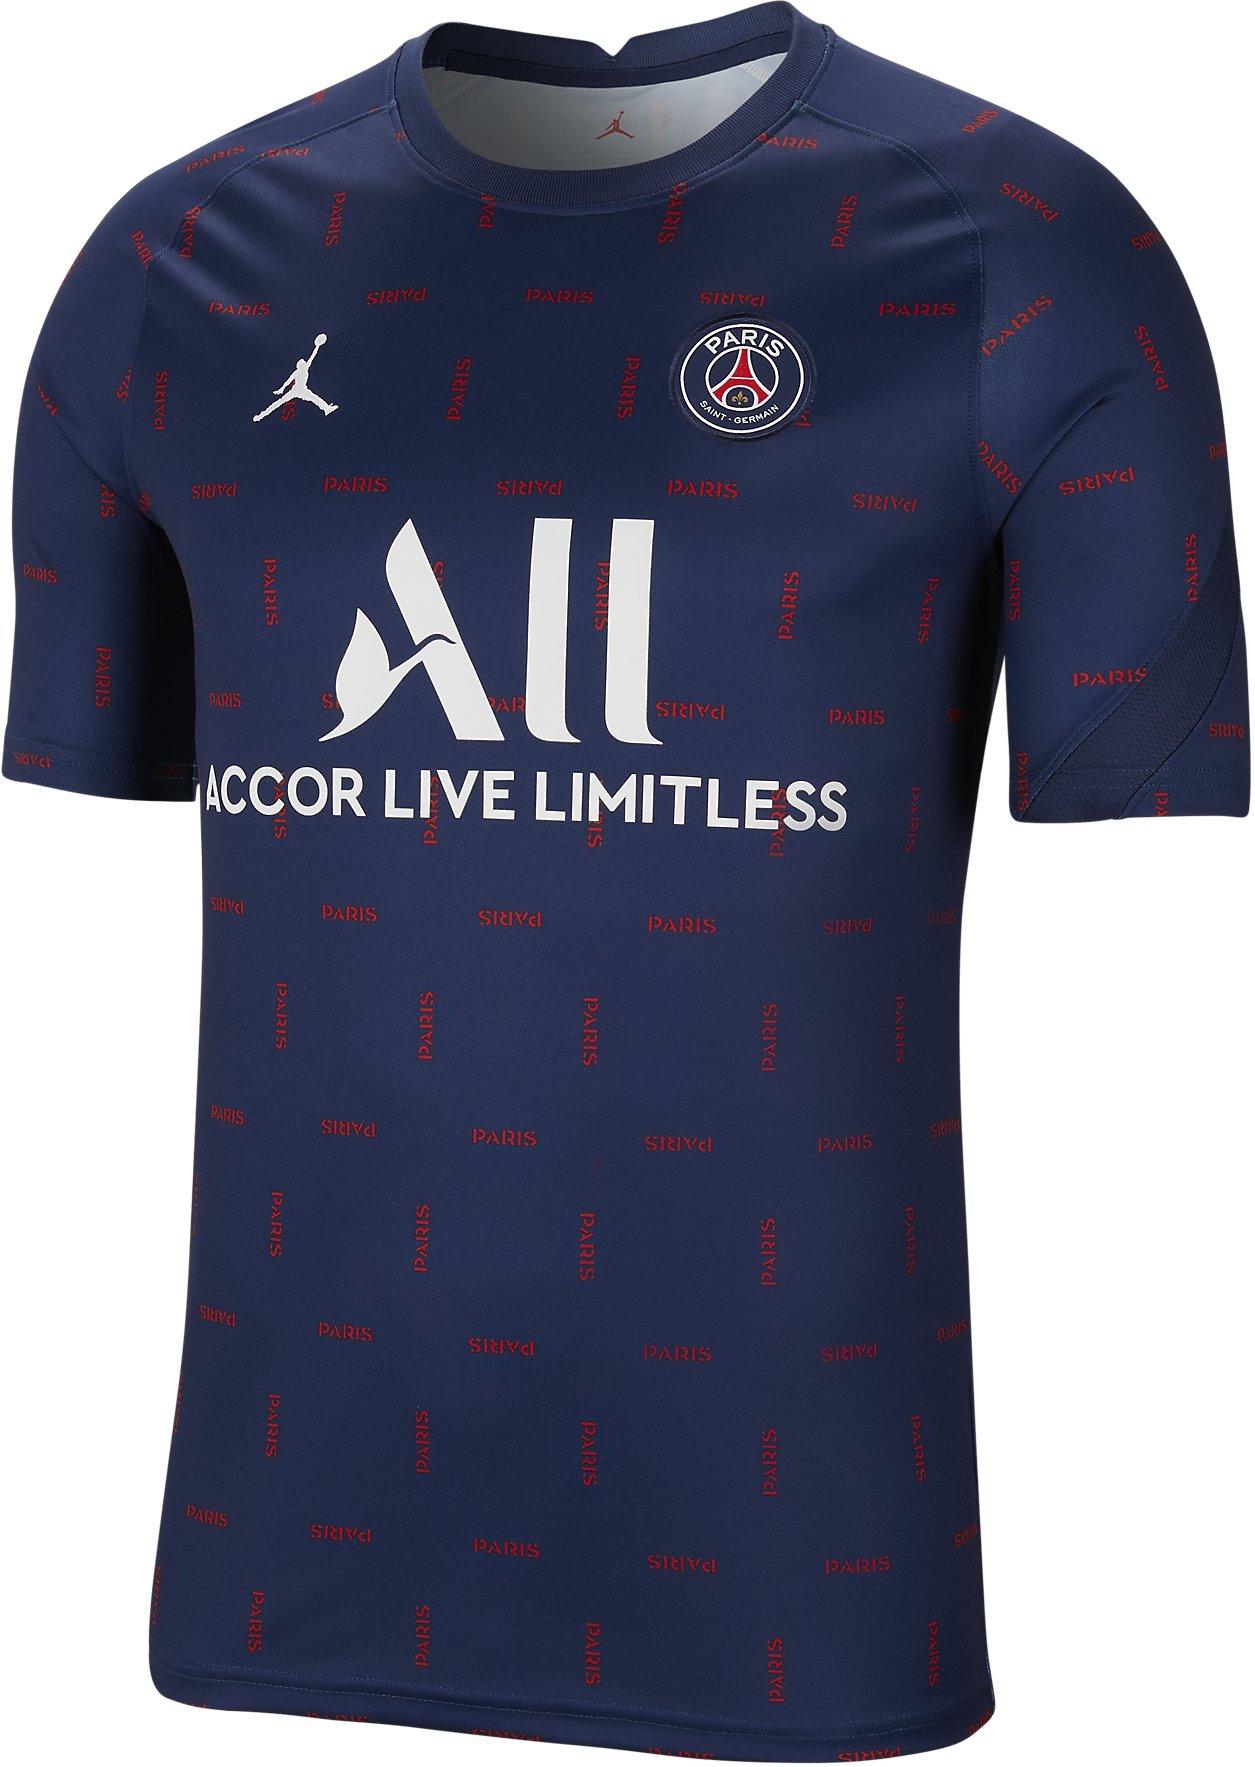 Wearing this PSG X LV shirt all summer 🤩 Link in bio 🌎#psg